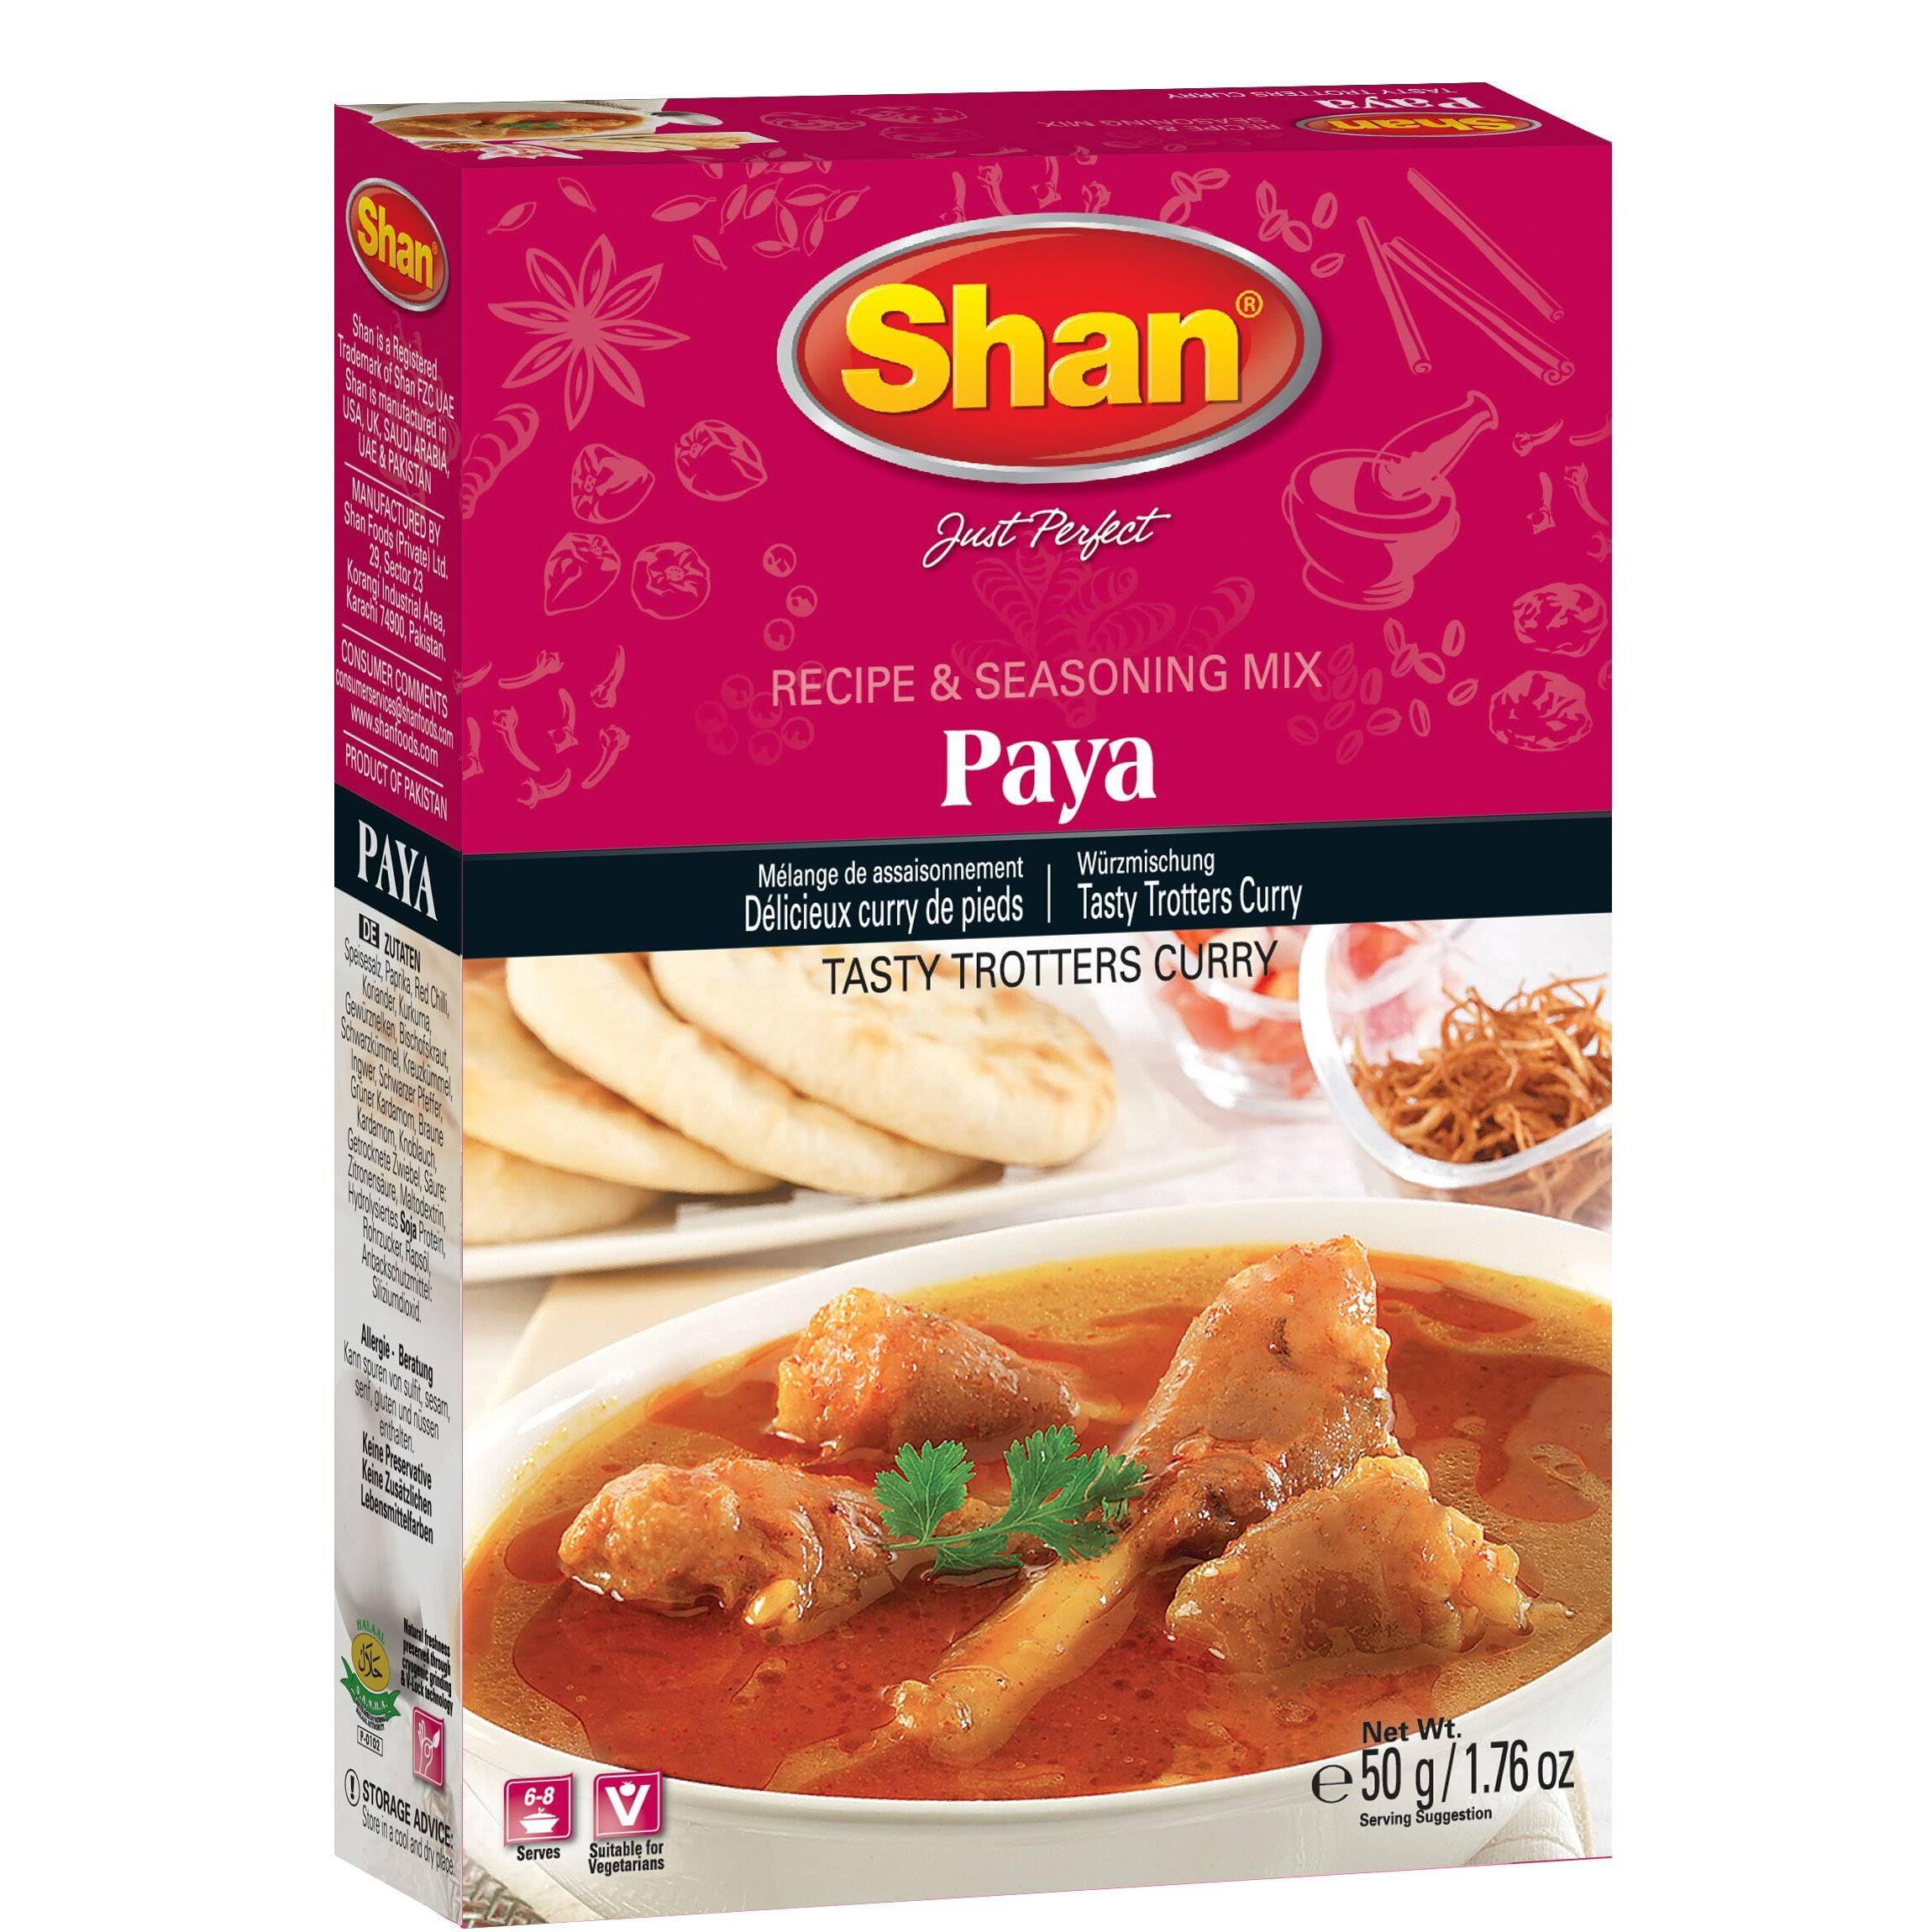 Shan Spice Mix For Paya Curry, 1.75 Ounce